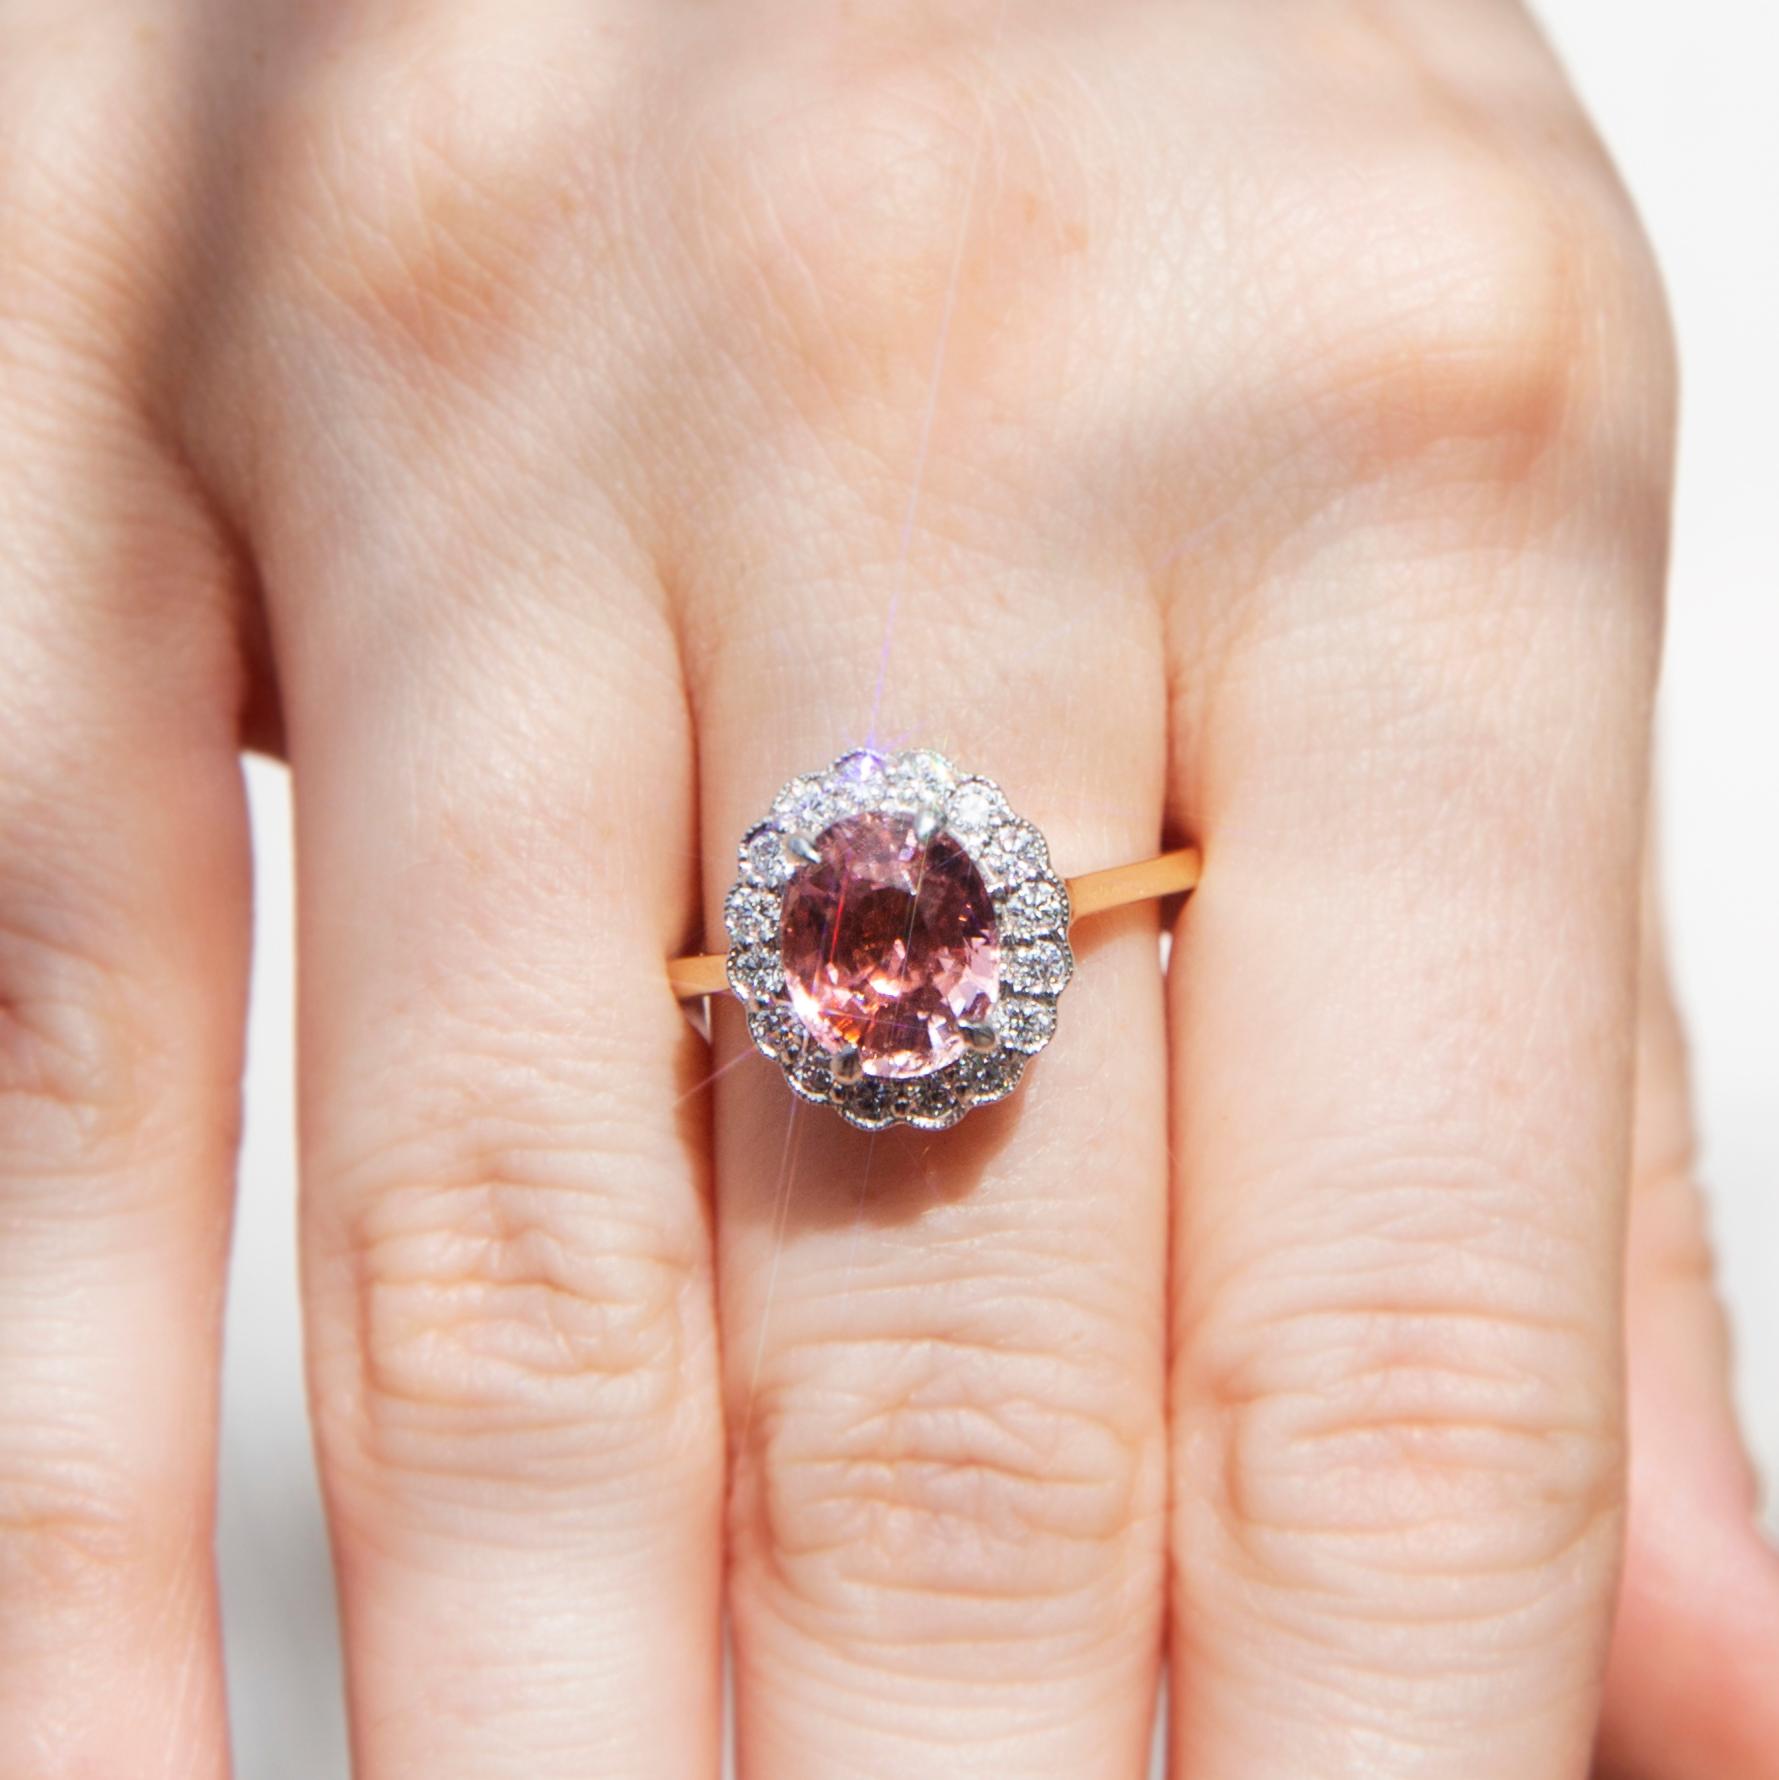 Lovingly crafted in 18 carat yellow and white gold is this alluring halo cluster ring featuring a stunning oval cut 2.41-carat bright peachy pink tourmaline and is set with a scalloped border of shimmering round brilliant cut diamonds. We have named